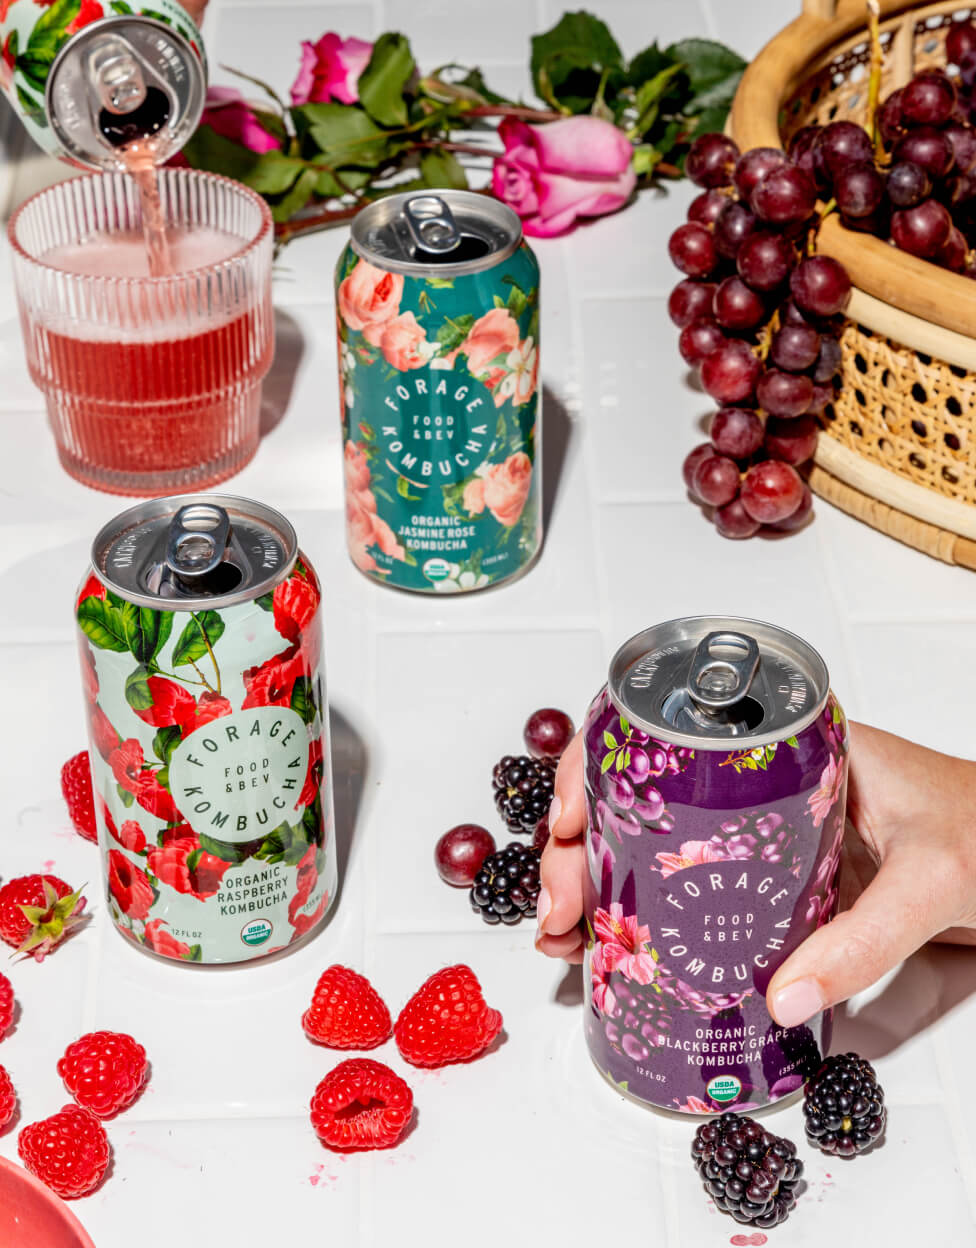 A variety of Forage Kombucha cans set on a white tablecloth surrounded by raspberries, blackberries, and grapes.